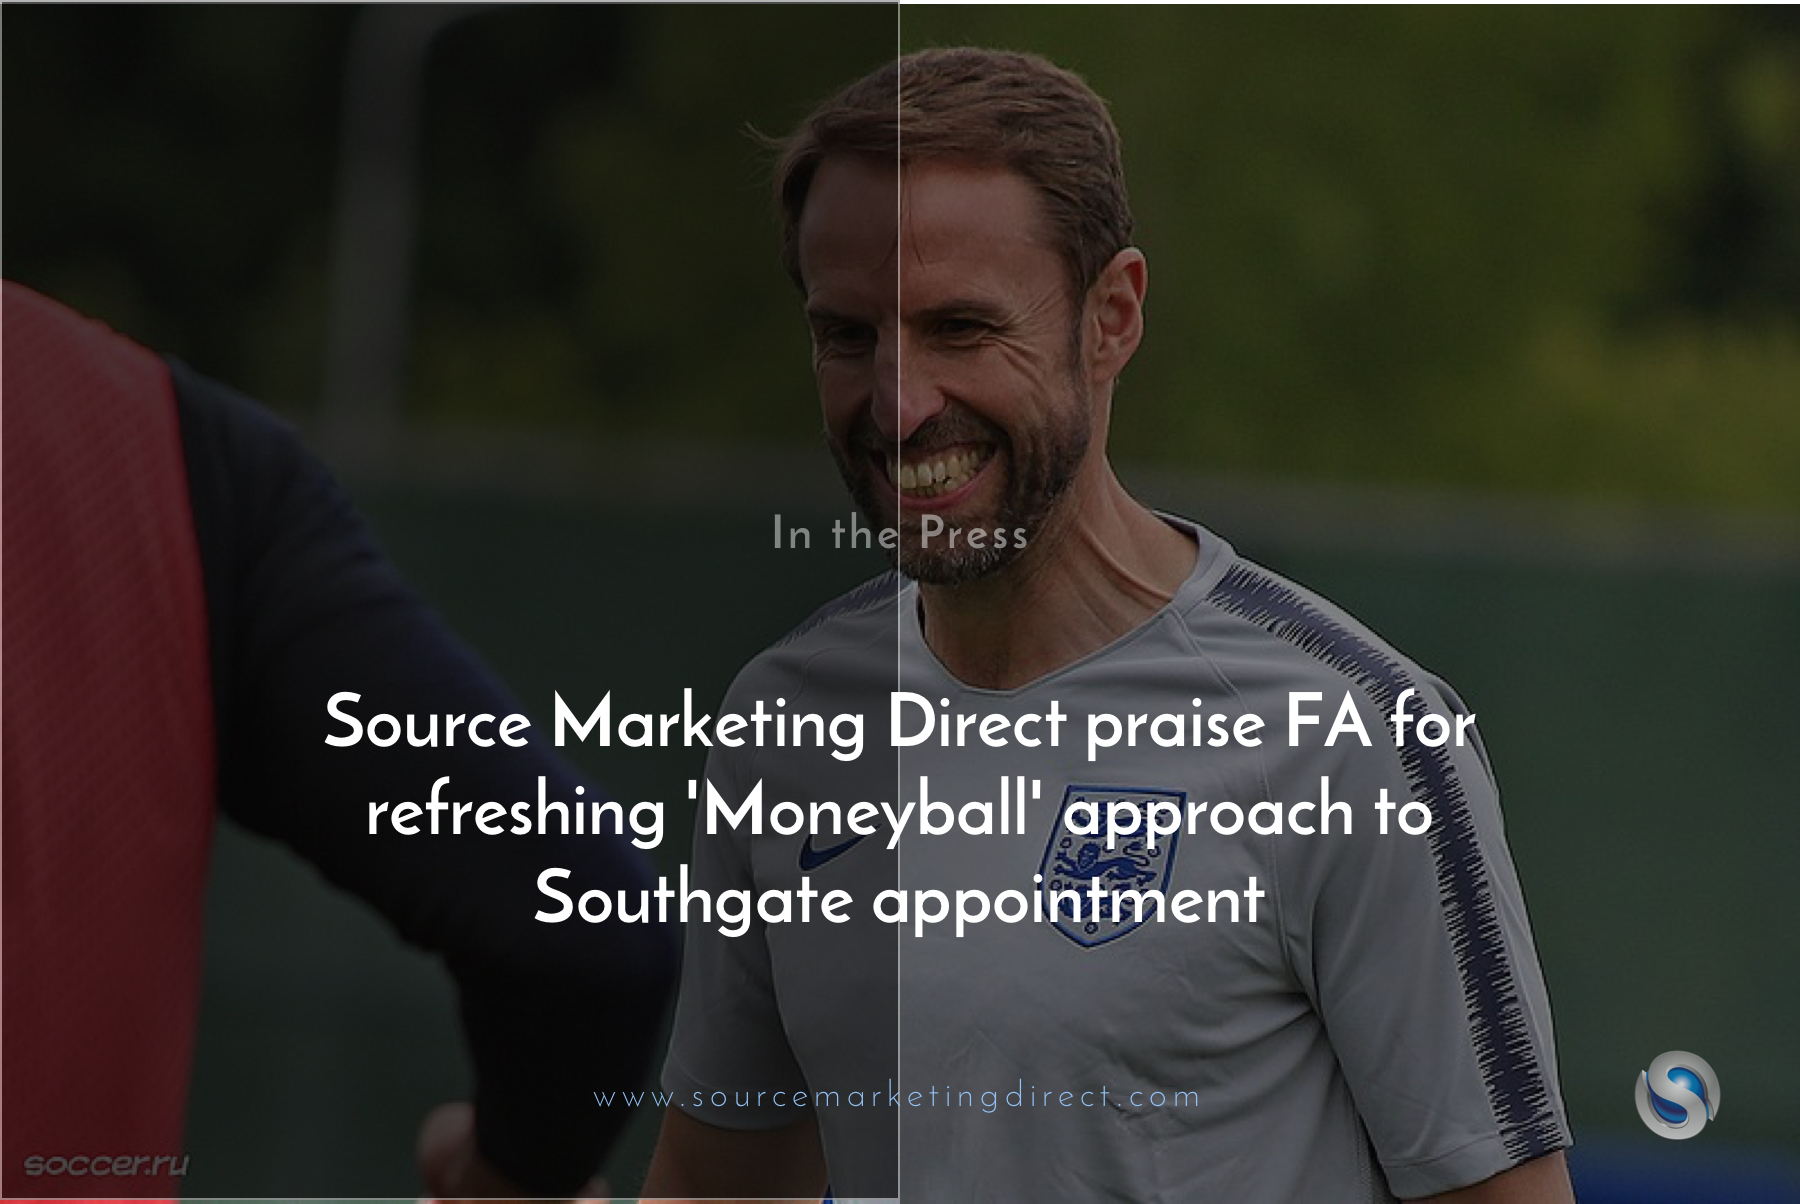 Source Marketing Direct praise FA for refreshing 'Moneyball' approach to Southgate appointment